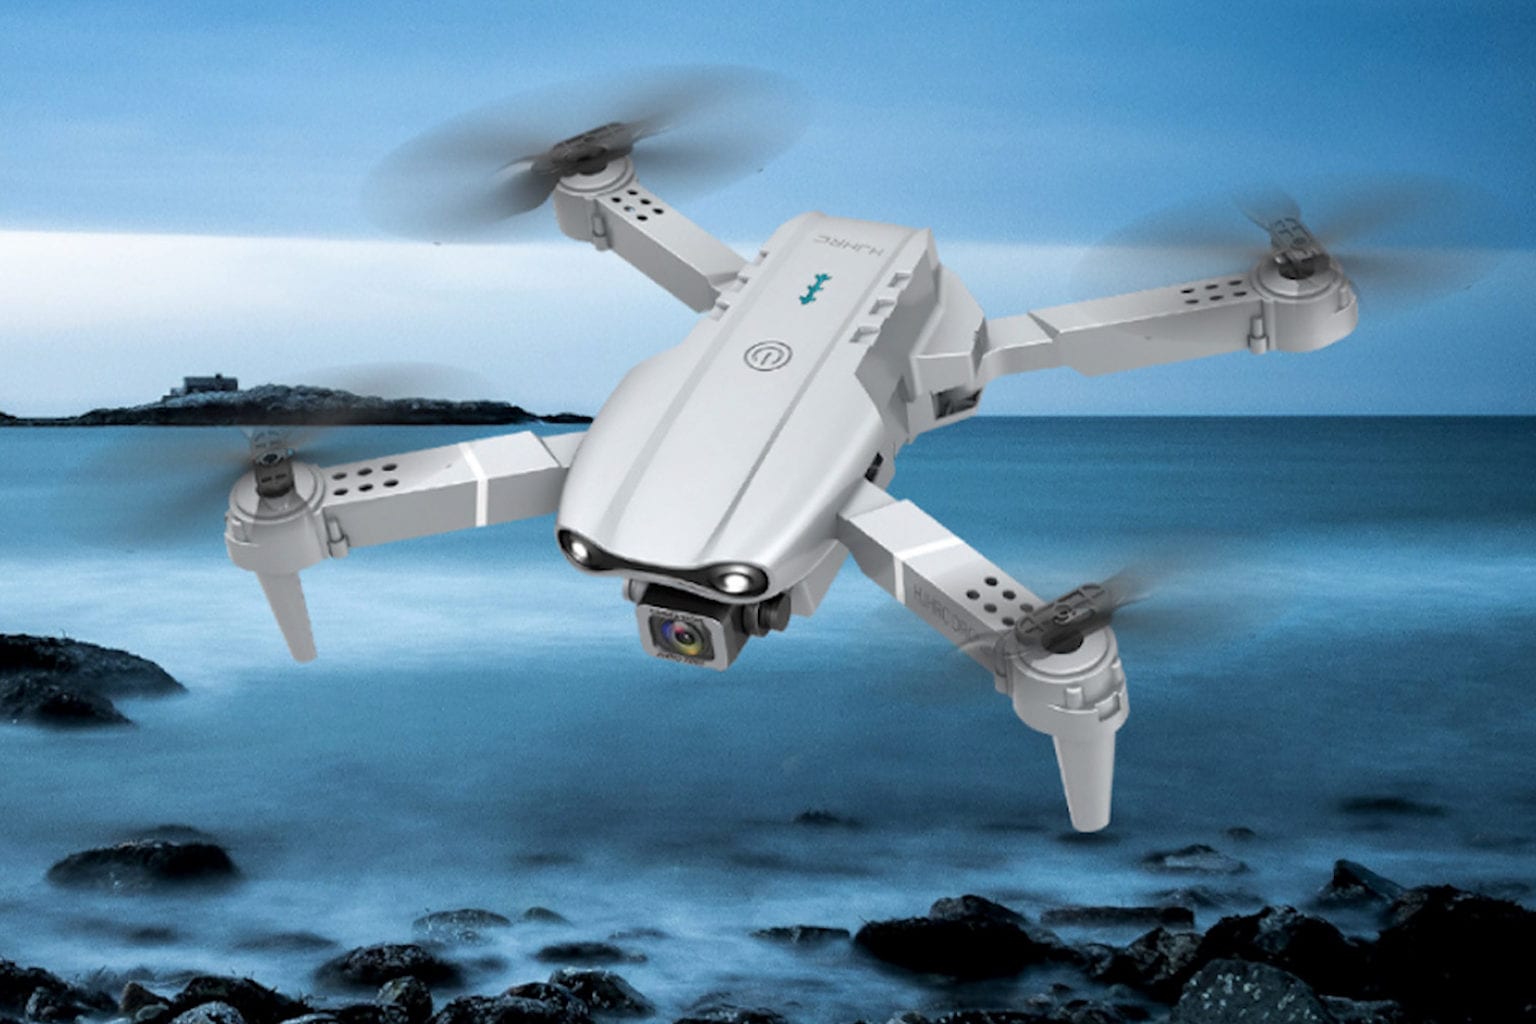 Get two drones for less than $130 with this amazing bundle.